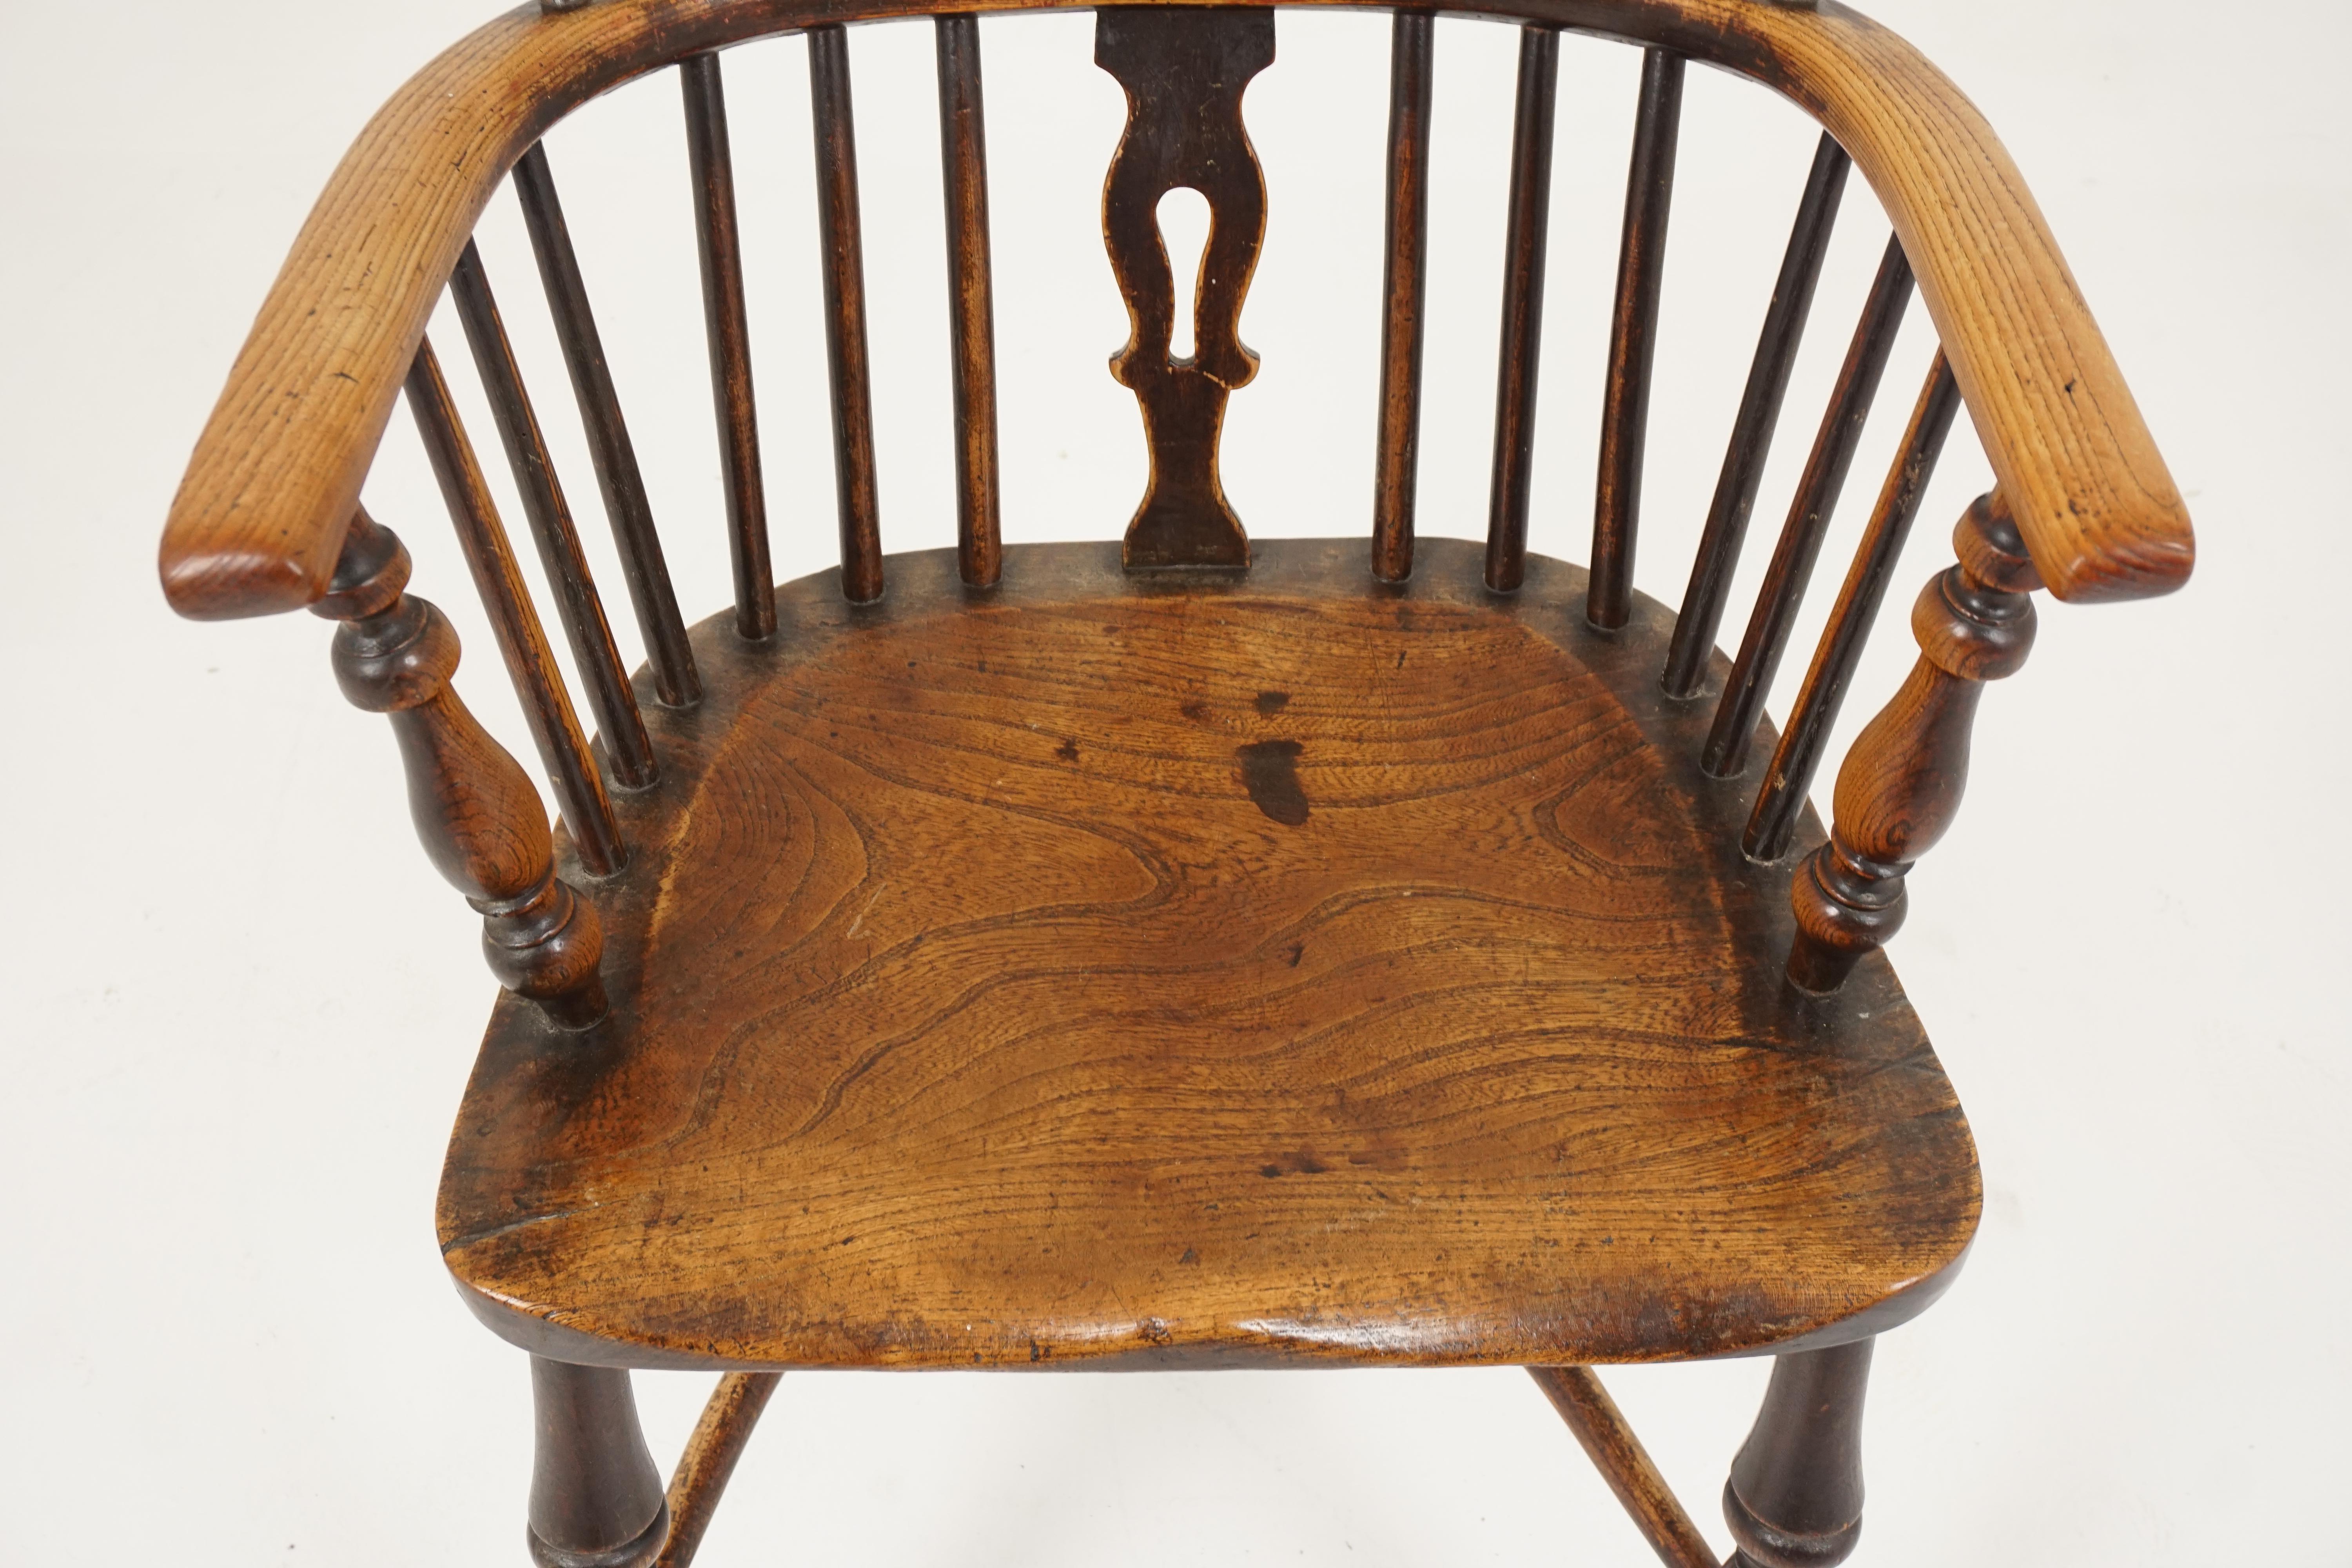 Antique Windsor arm chair, Country Chair, Elm + Yew, Scotland 1850, H544

Scotland 1850
Elm + Yew
Original finish
Consists of a hoop back leading down to a central pierced splat of stylized Fleur De Lys Decorations 
With three spindles to either